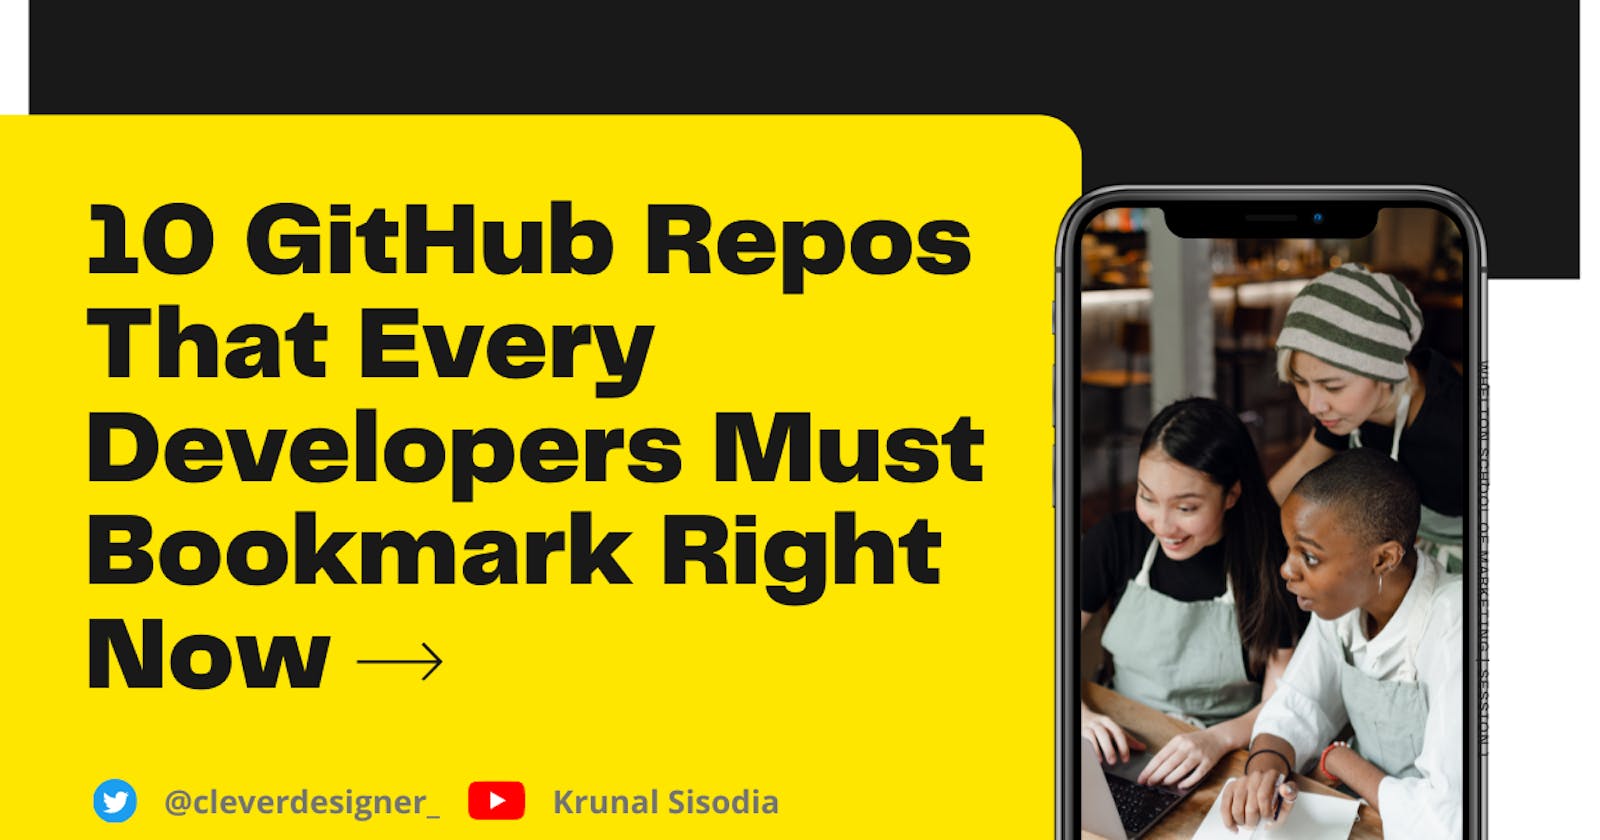 10 GitHub Repos That Every Developers Must Bookmark Right Now